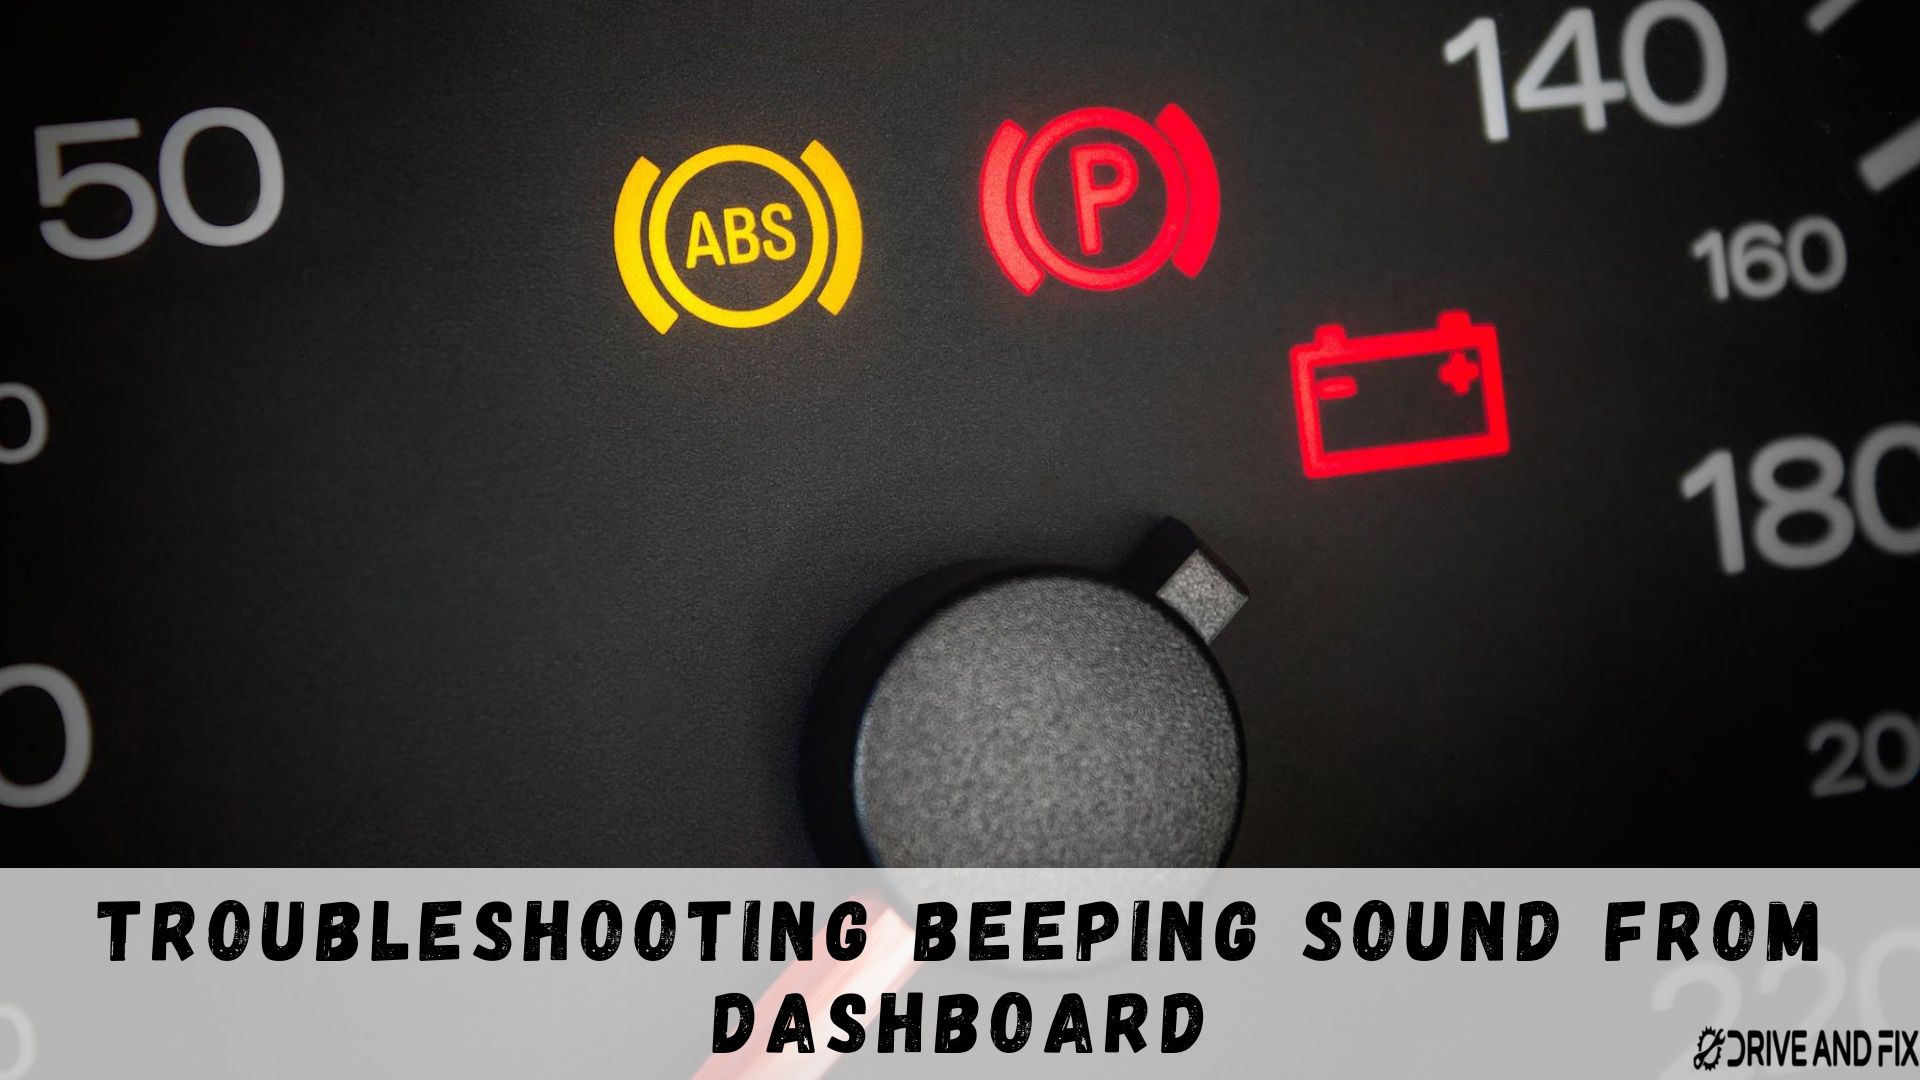 Beeping sound from dashboard